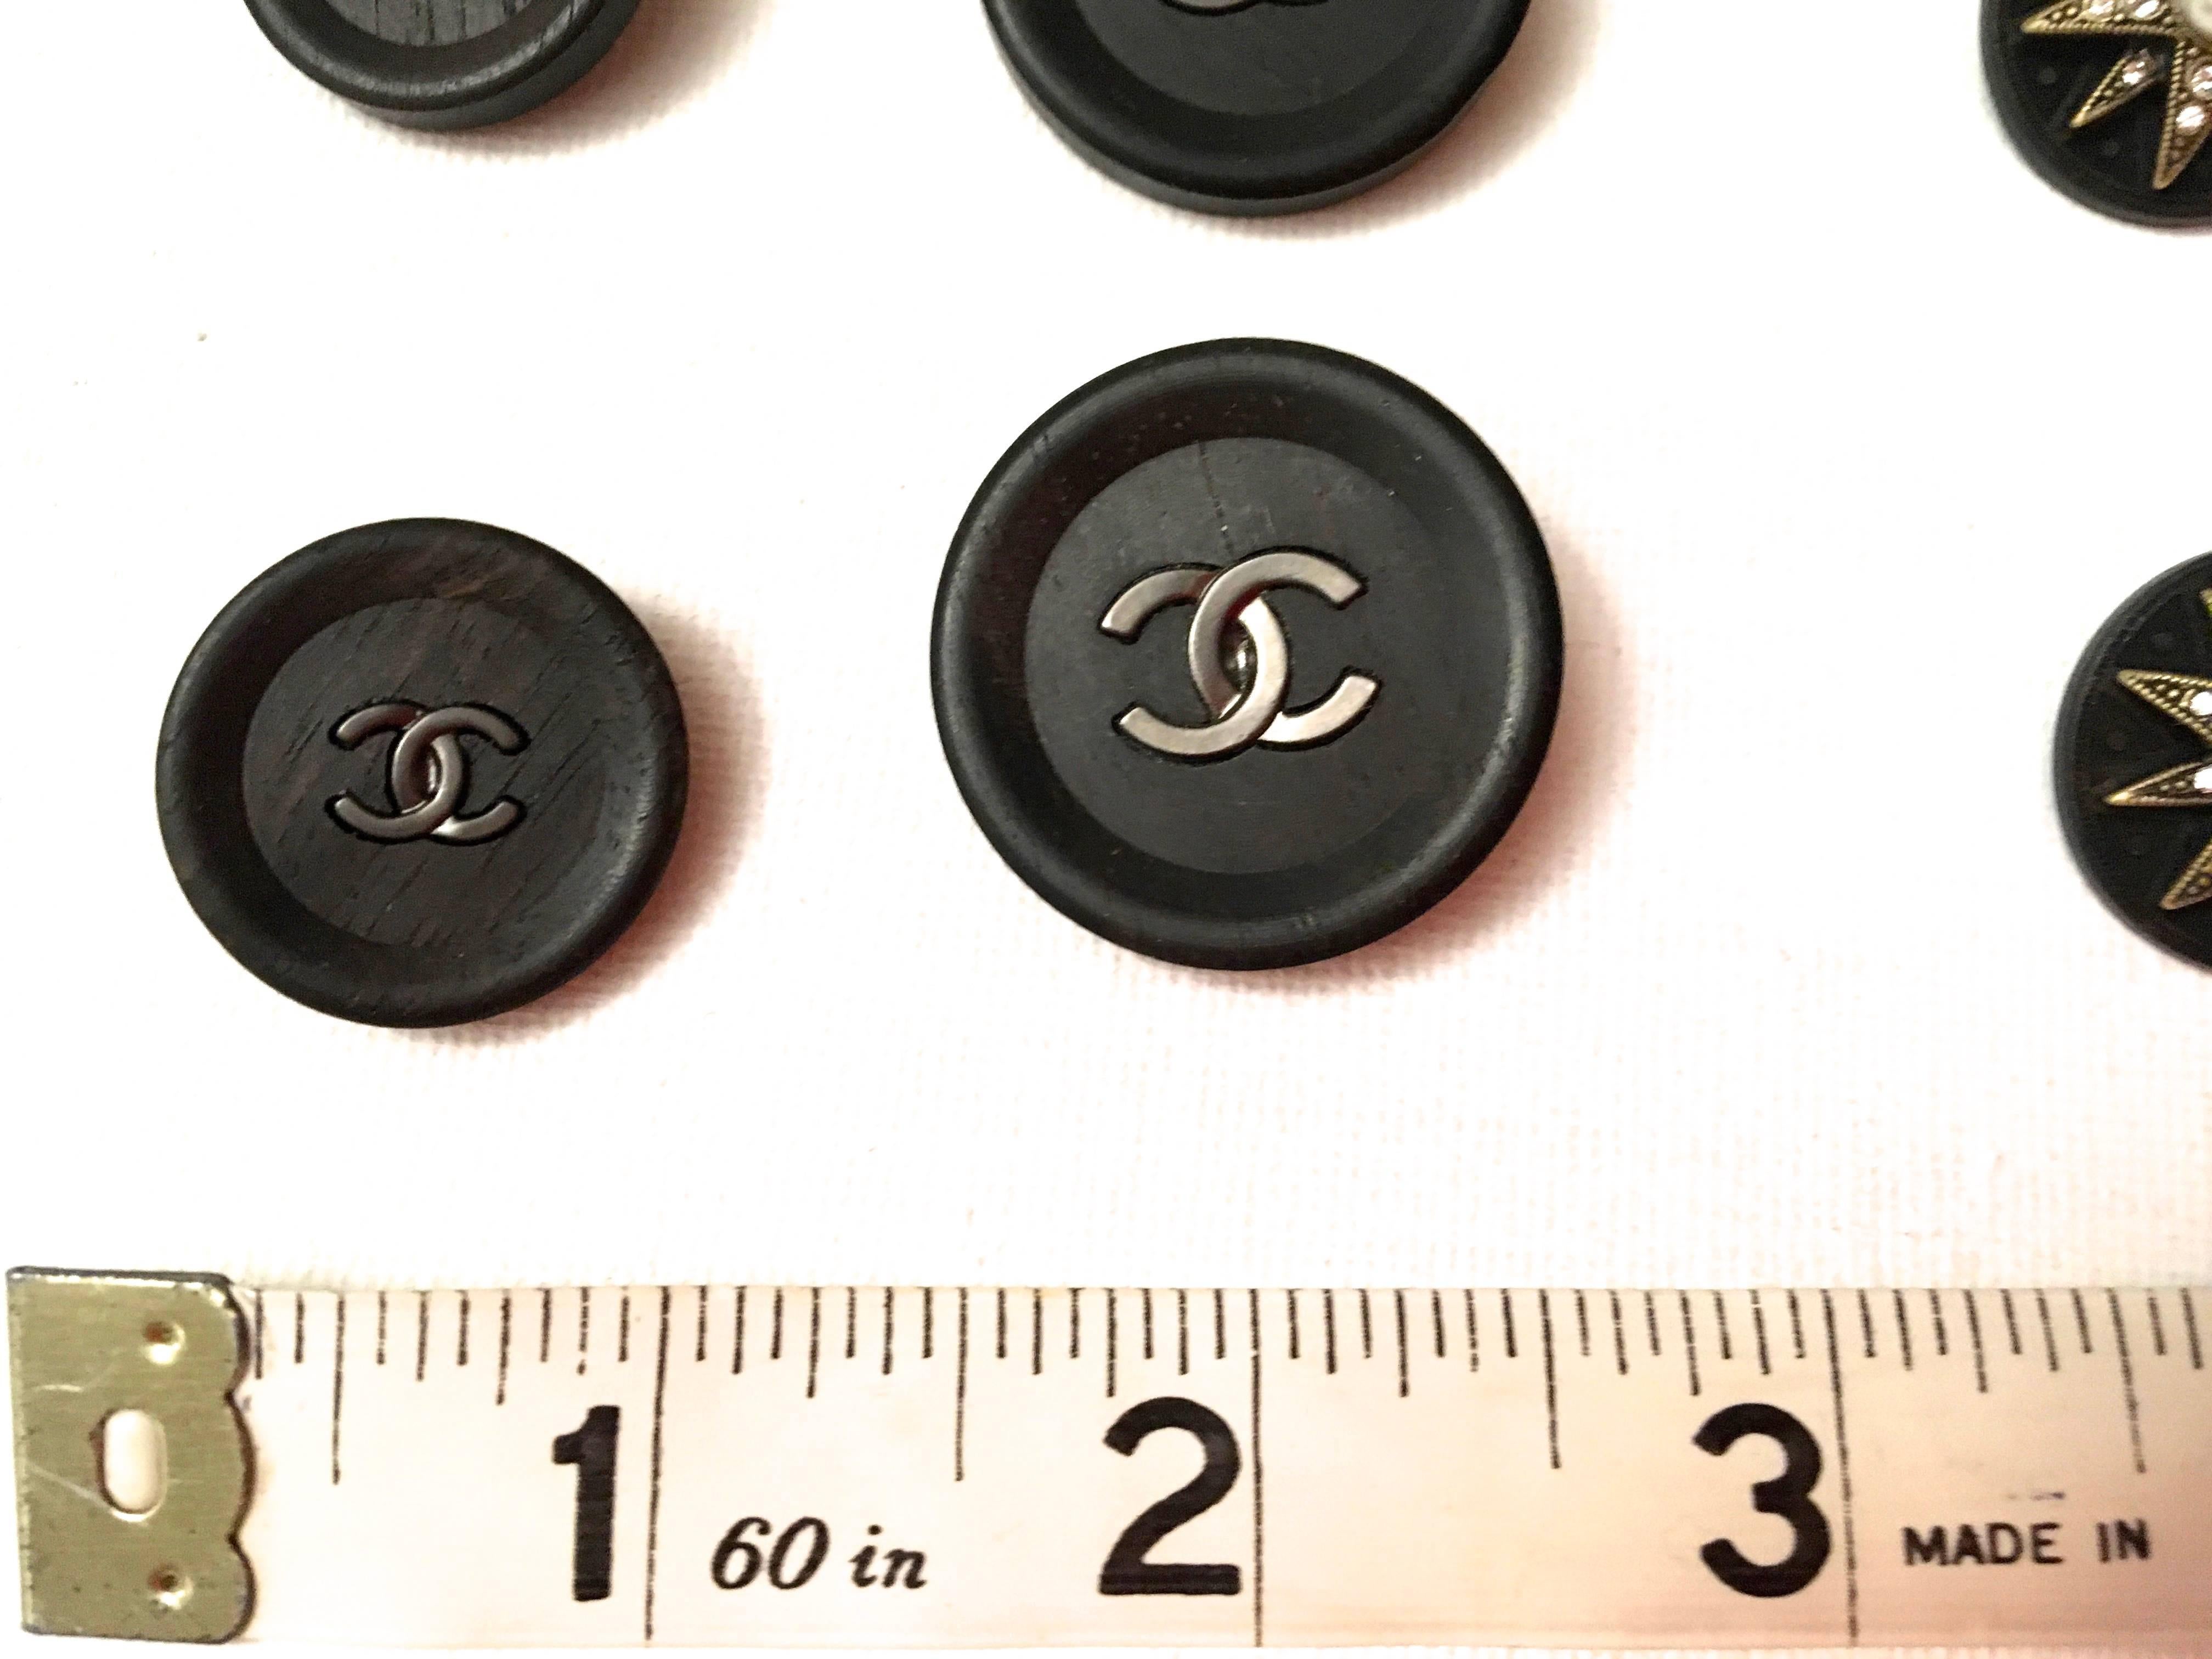 Presented here is a beautiful set of buttons from Chanel. In this particular lot, there are 4 buttons that are dark brown almost black, and there are 4 buttons that are a series of starbursts at the center of the front. Each starburst button has a